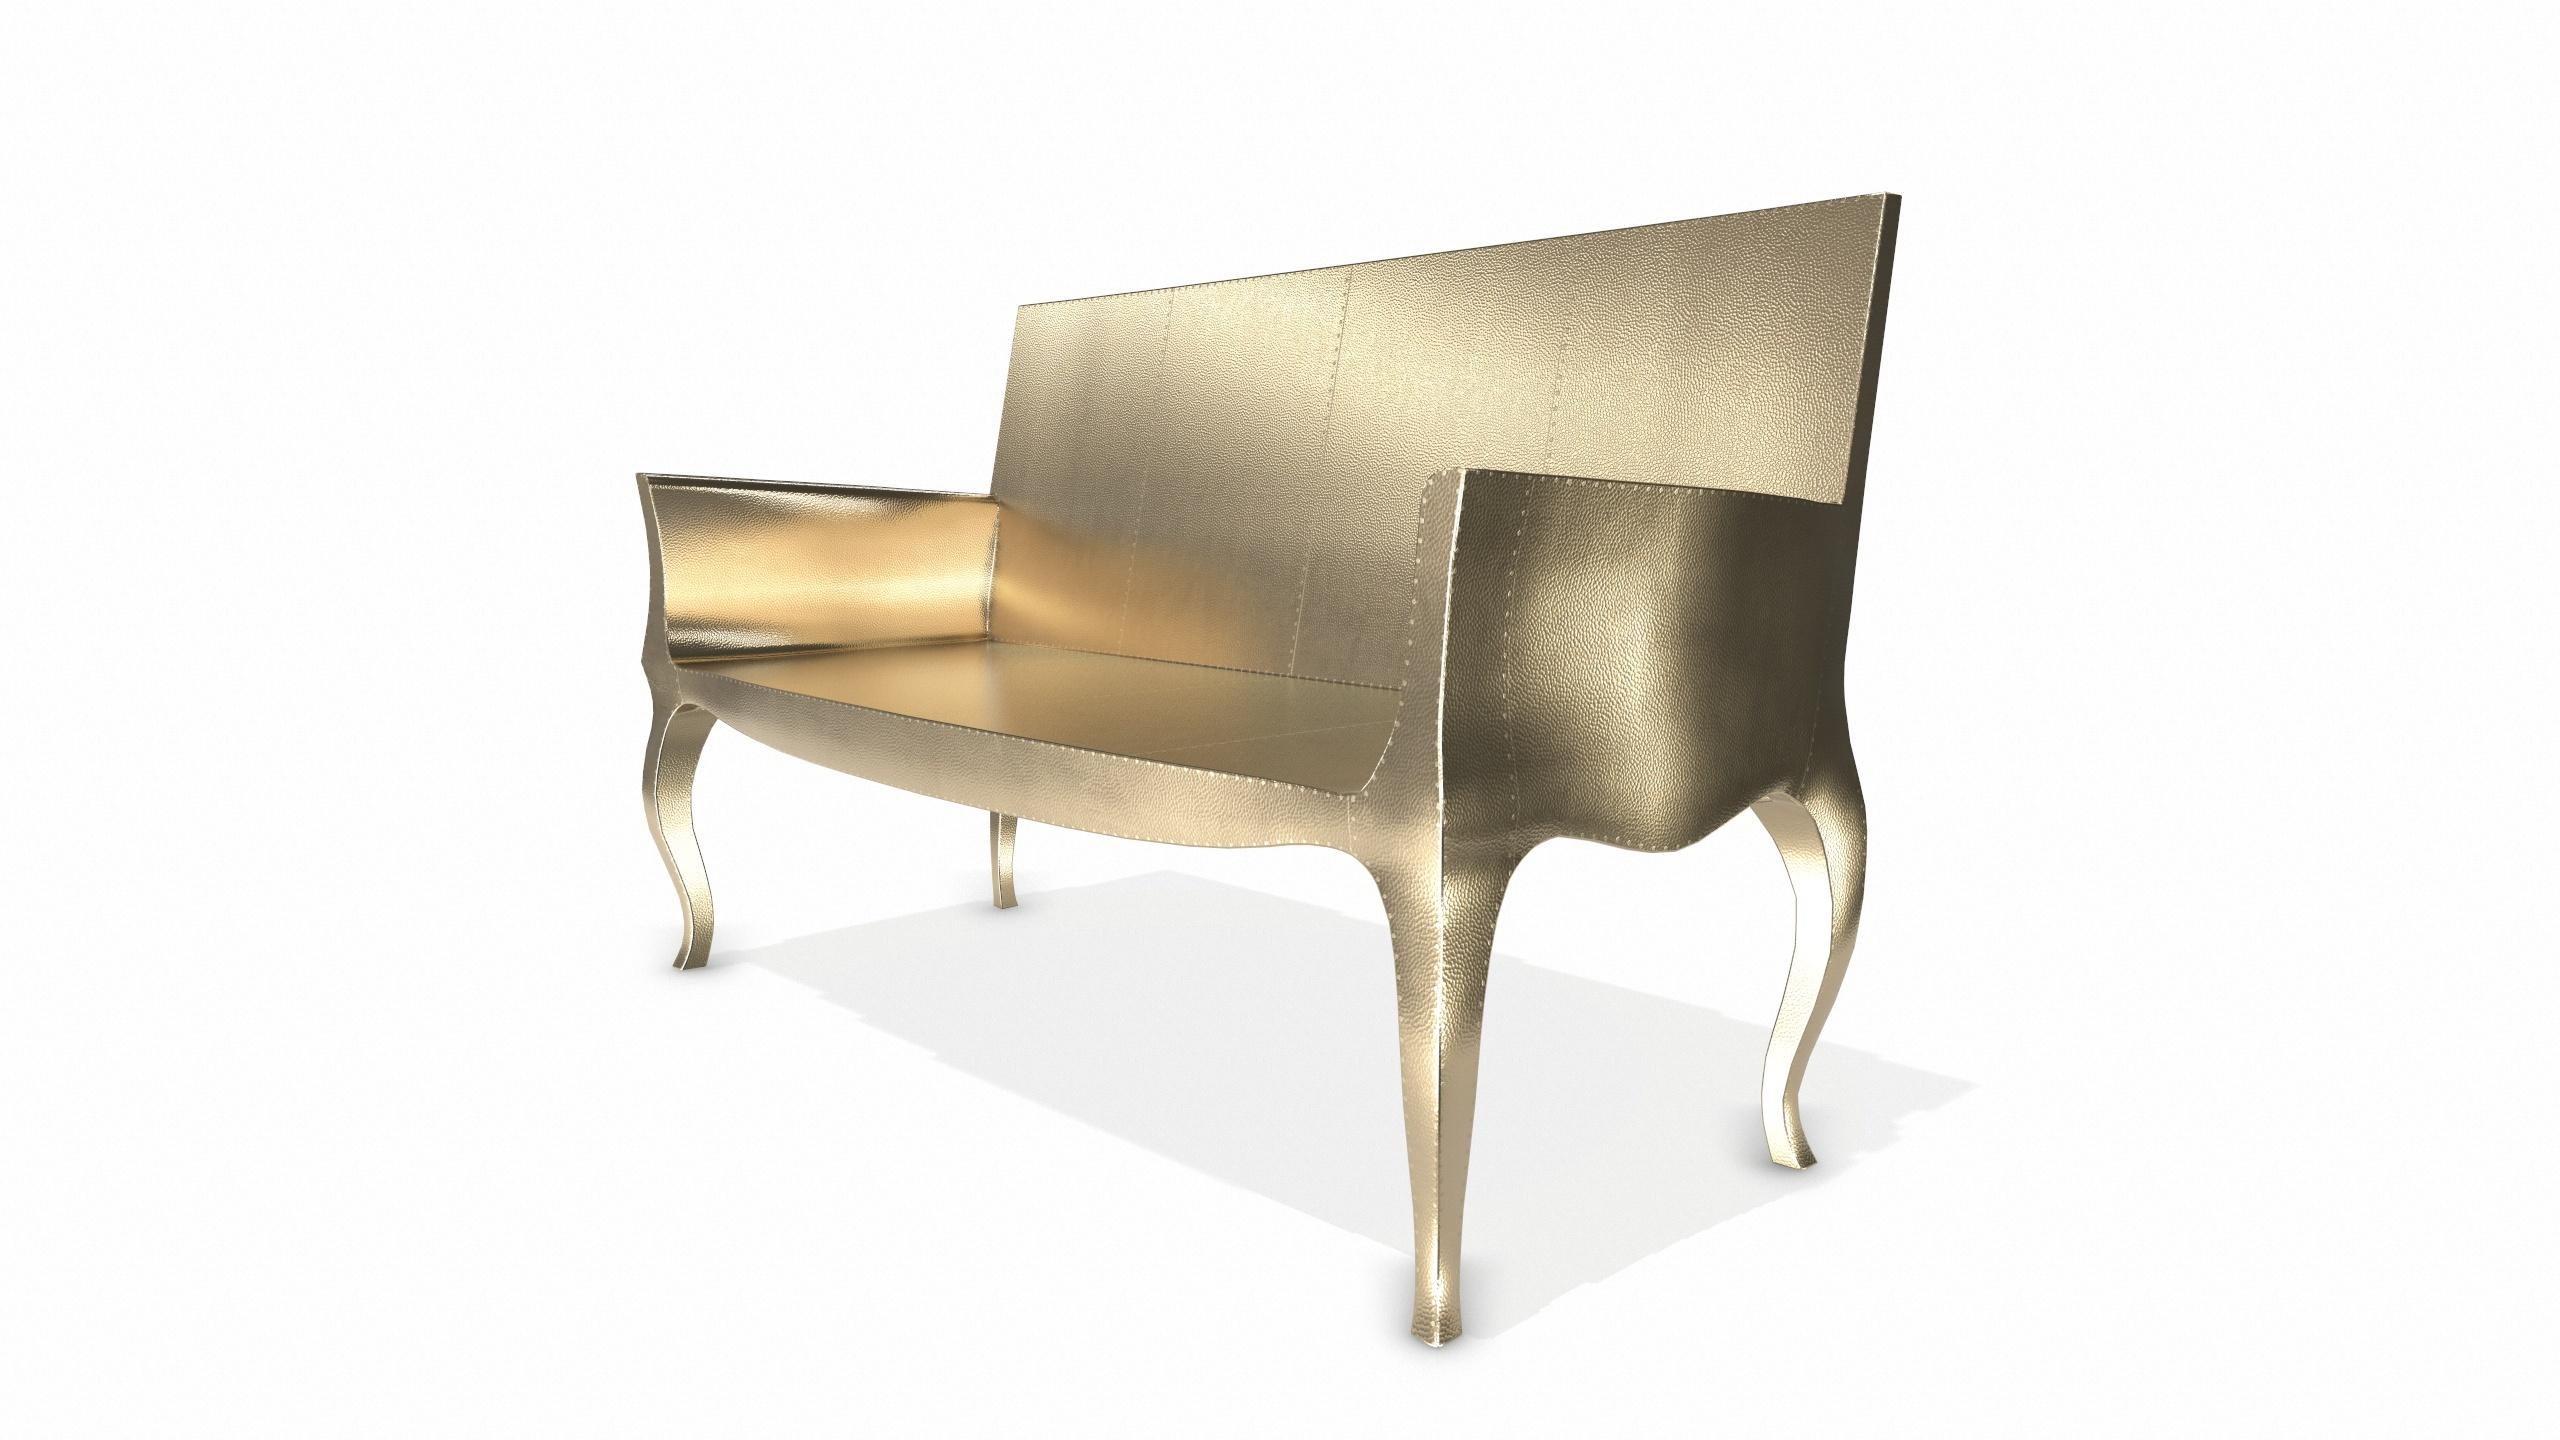 Hand-Crafted Louise Settee Art Deco Settees in Mid. Hammered Brass by Paul Mathieu For Sale